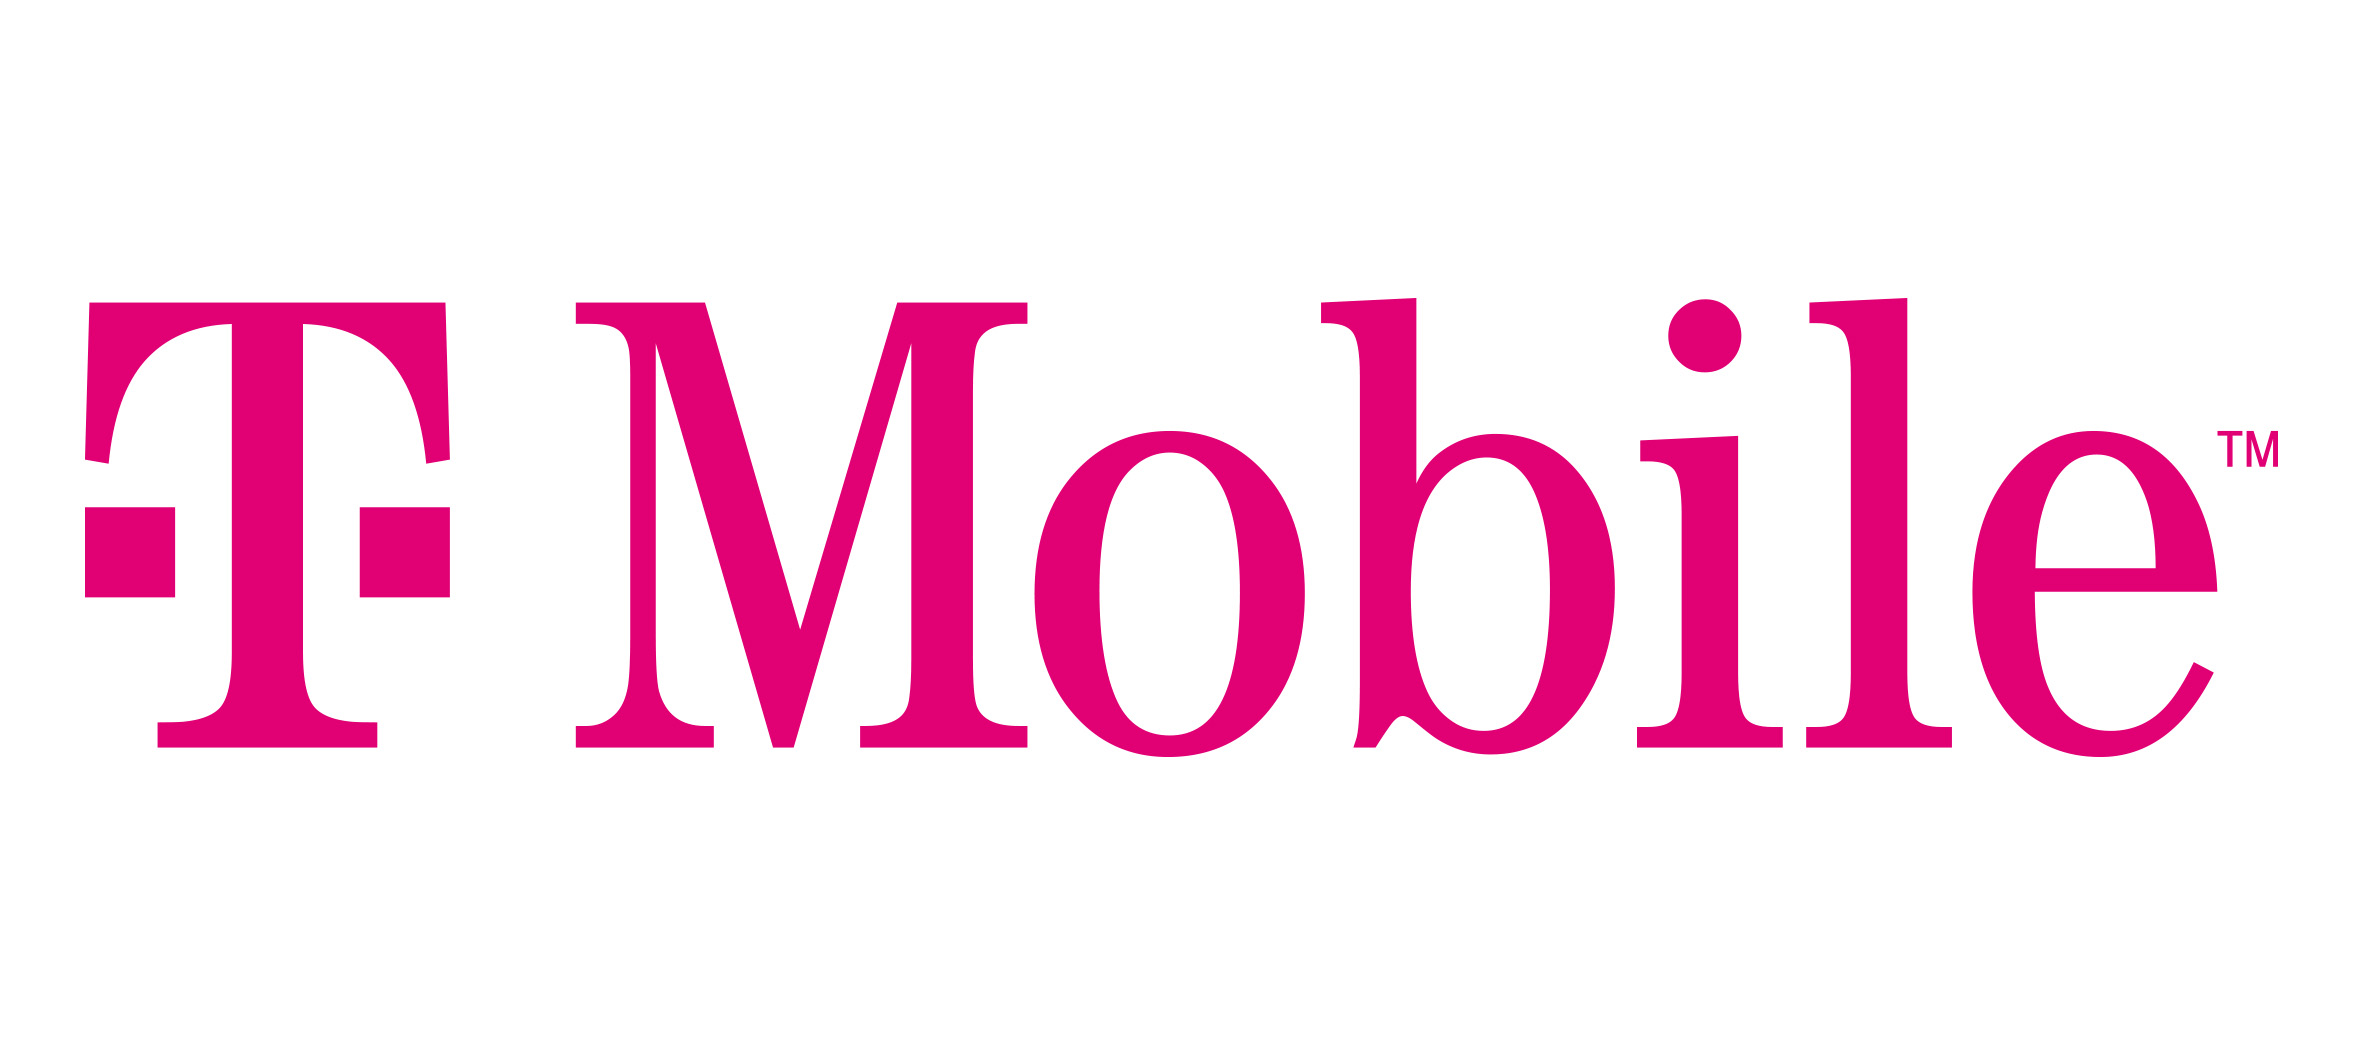 T-Mobile Magenta Max, Free Line On Us (not LOU P6) YMMV